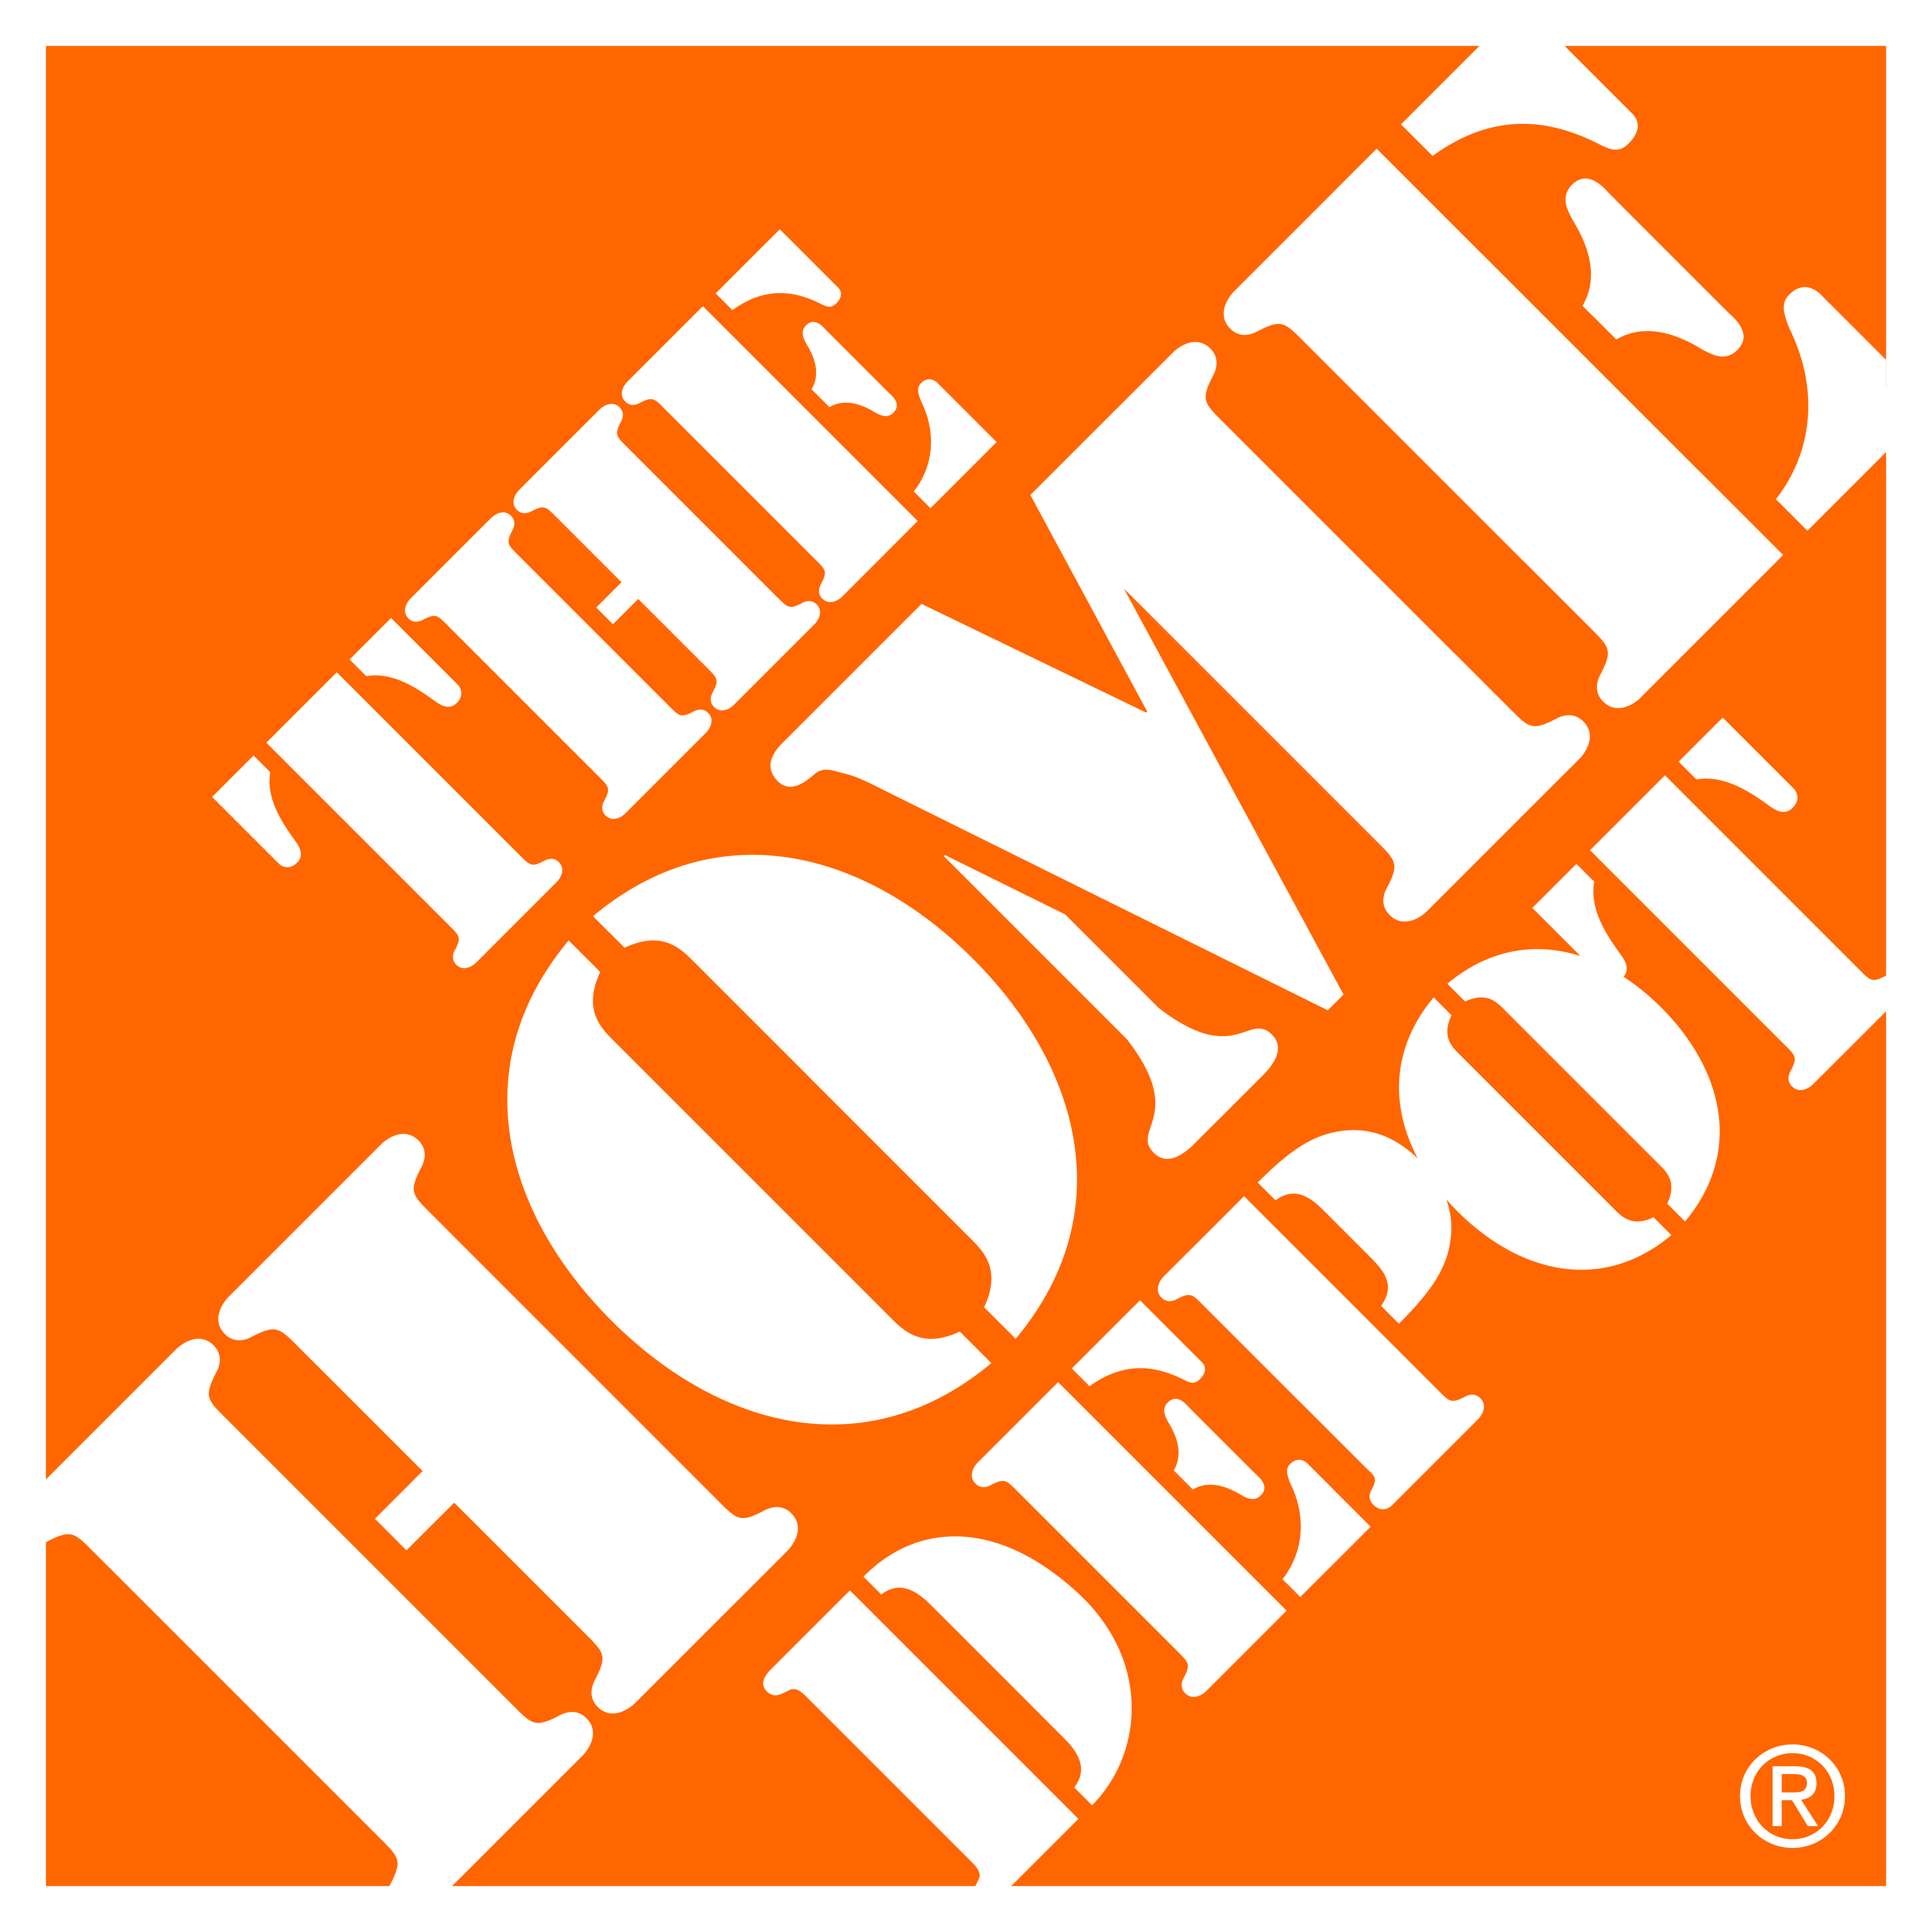 INSTANT 1x ONE HD Home Depot 15% OFF 1-C0UPON FAST!! 0NLINE-ONLY 